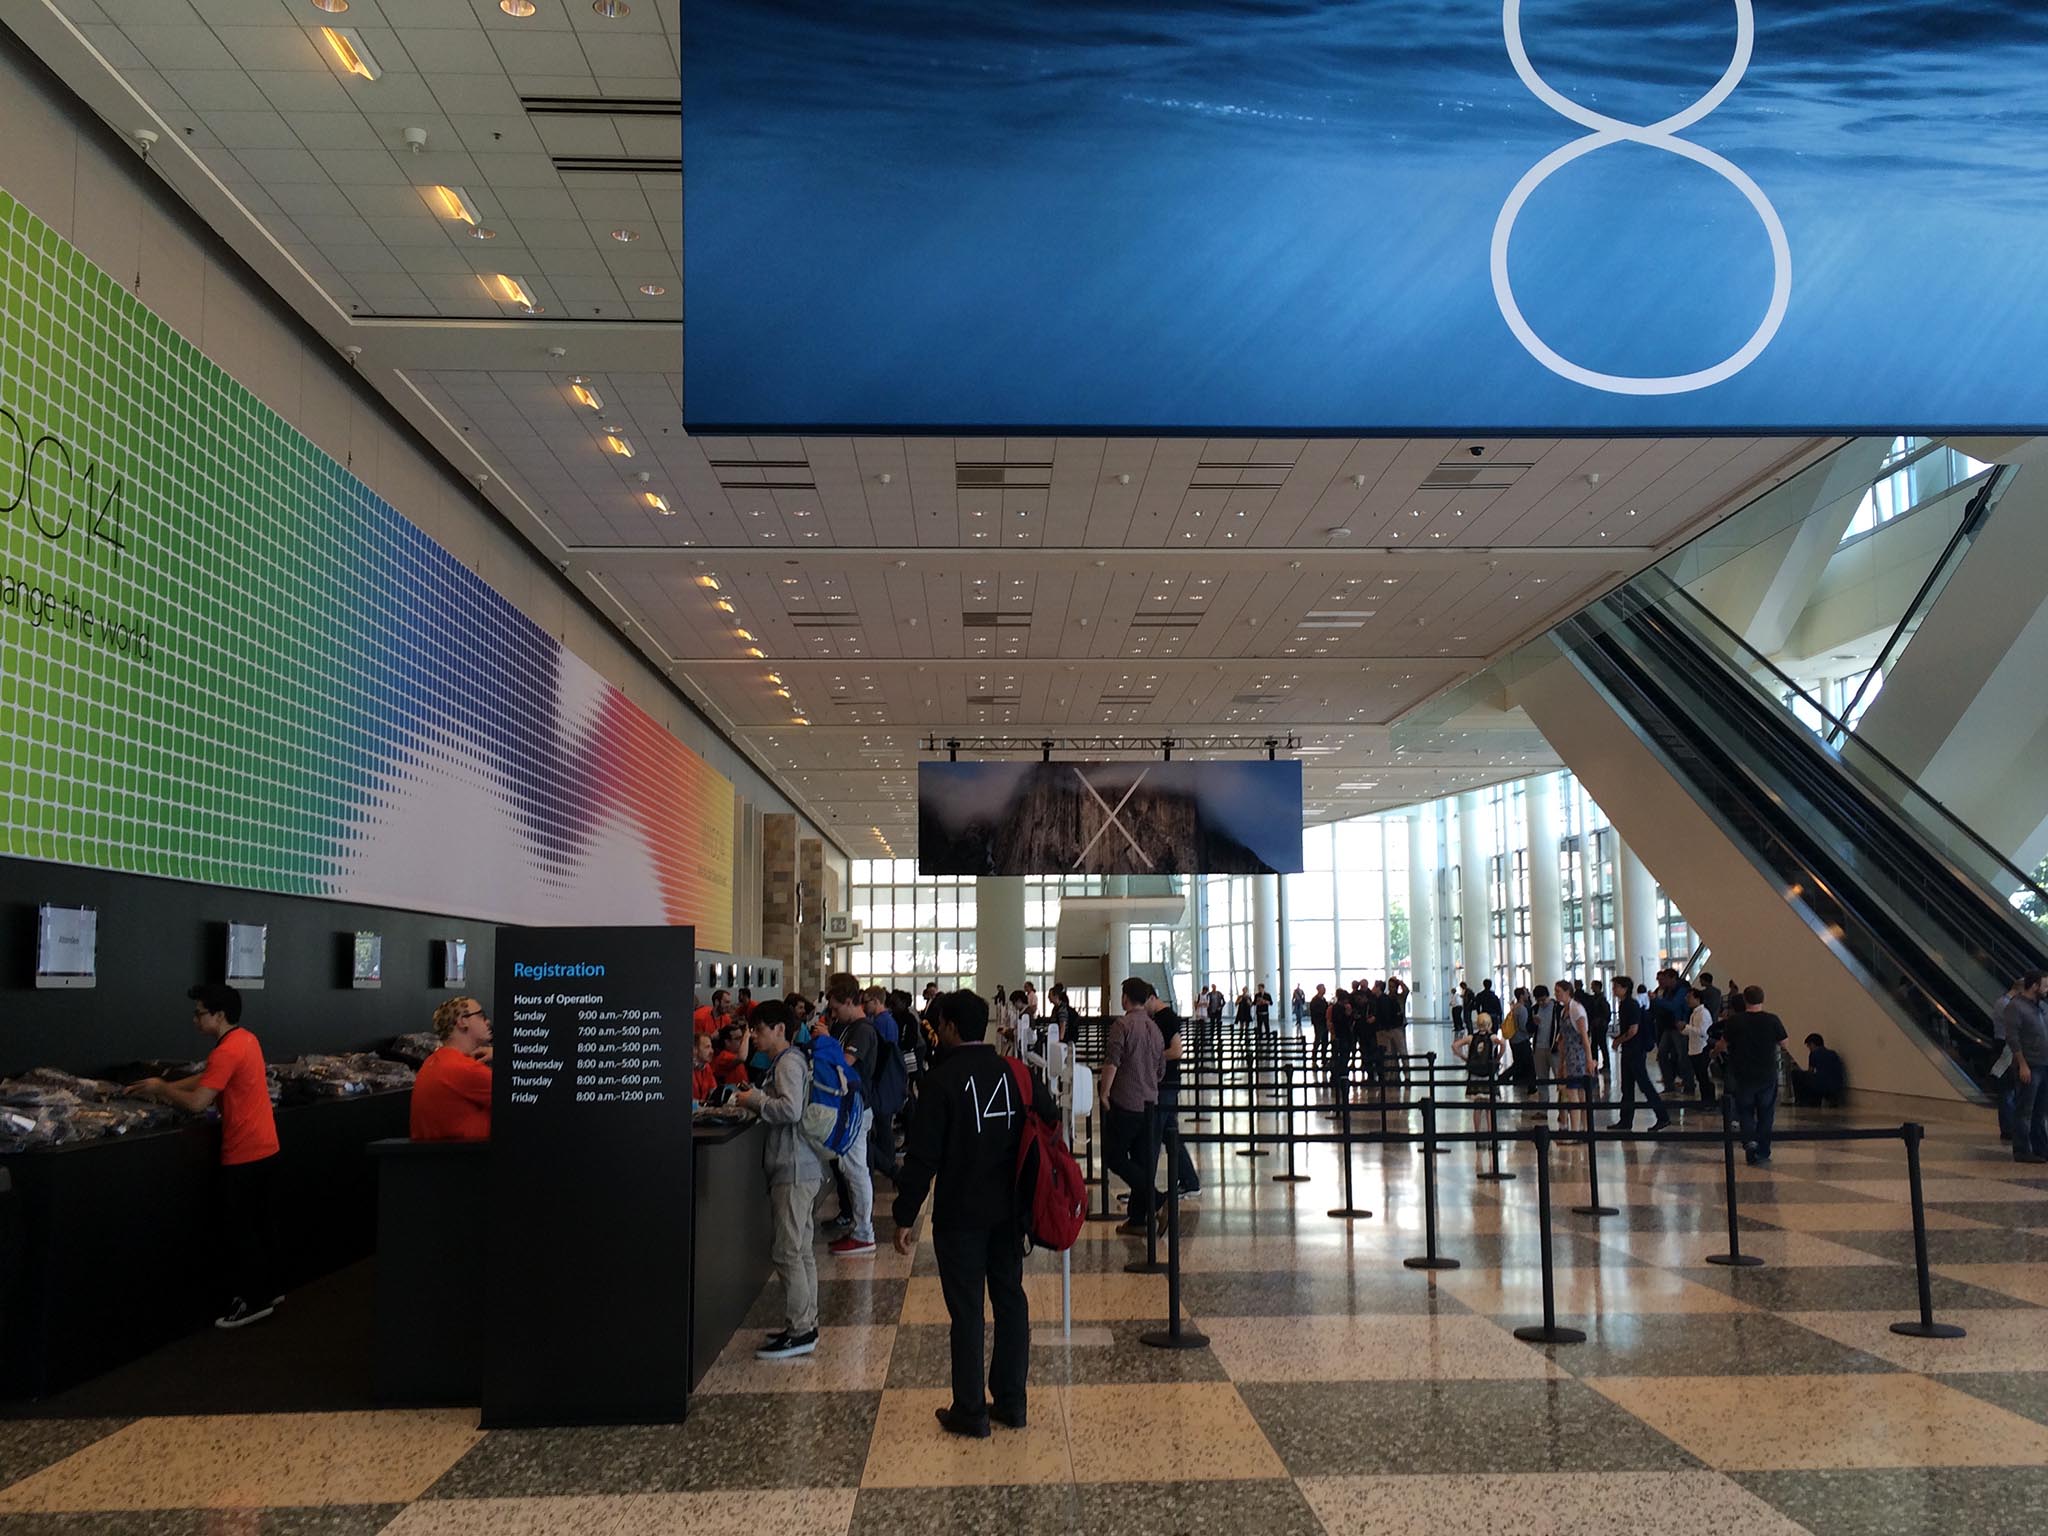 WWDC 2014 banners suggest the name OS X Yosemite